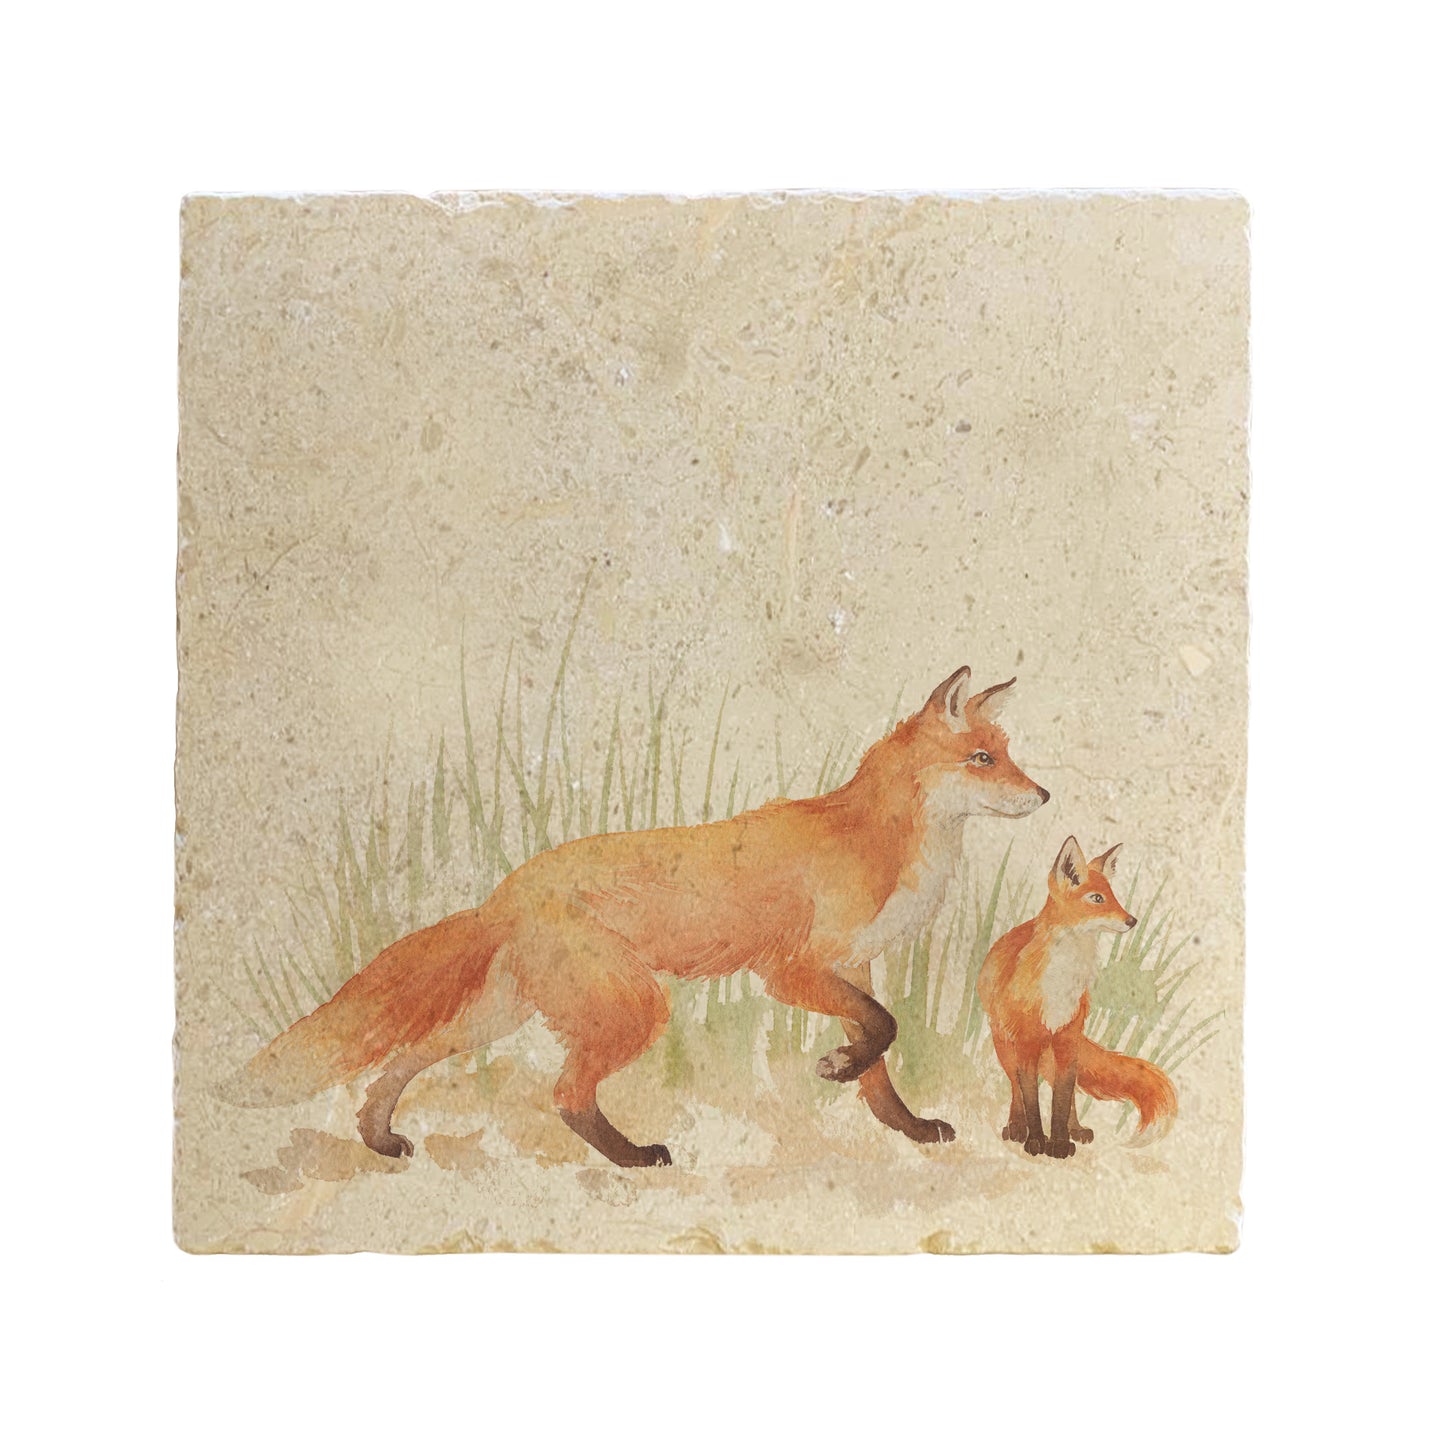 A square cream marble placemat featuring a watercolour countryside animal design of a fox and fox cub.